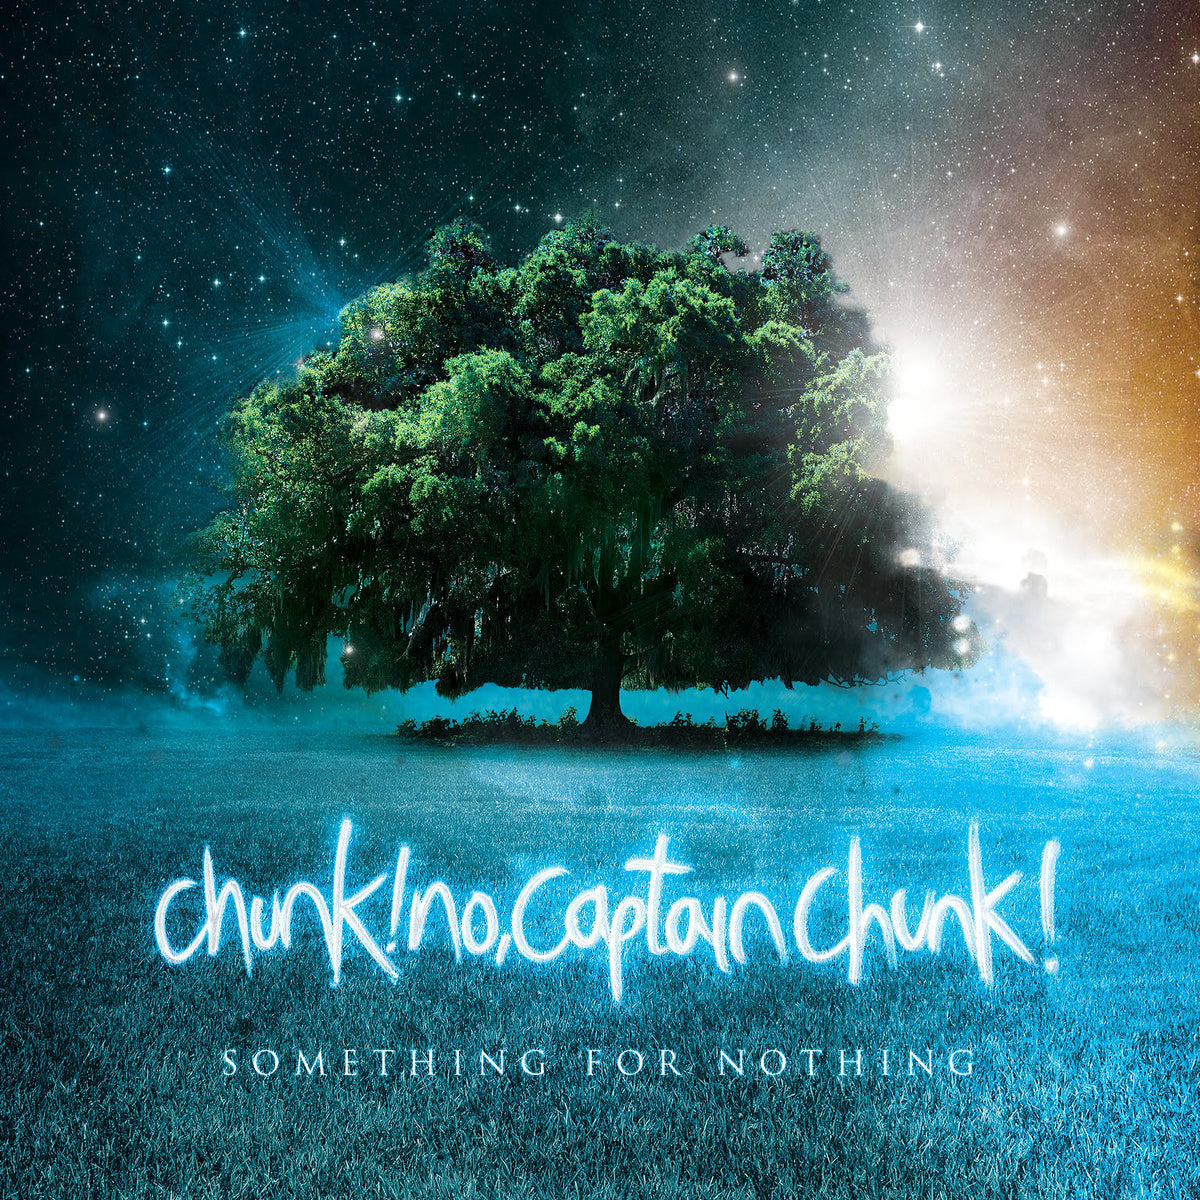 Chunk! No, Captain Chunk! "Something For Nothing" Cassette